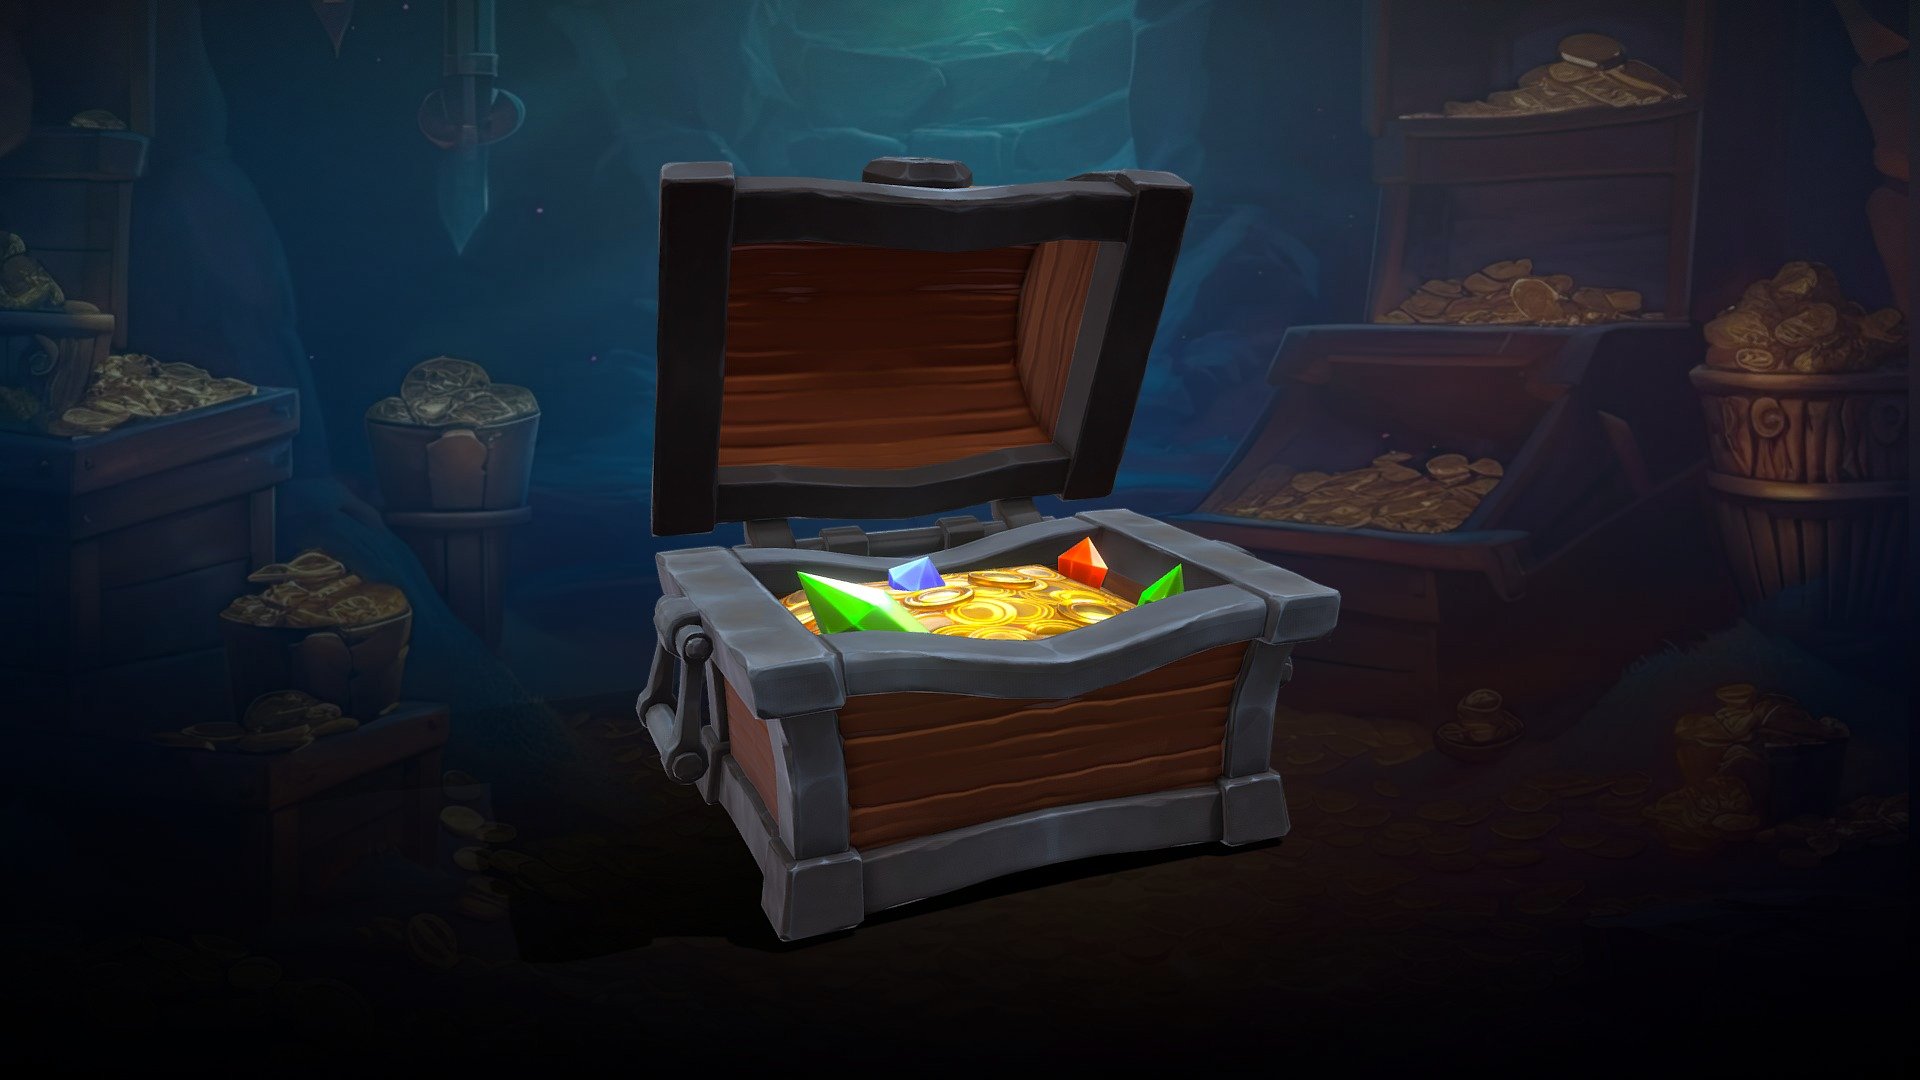 Stylized Prop for a project.

Software used: Zbrush, Autodesk Maya, Autodesk 3ds Max, Substance Painter - Stylized Fantasy Treasure Chest - 3D model by N-hance Studio (@Malice6731) 3d model